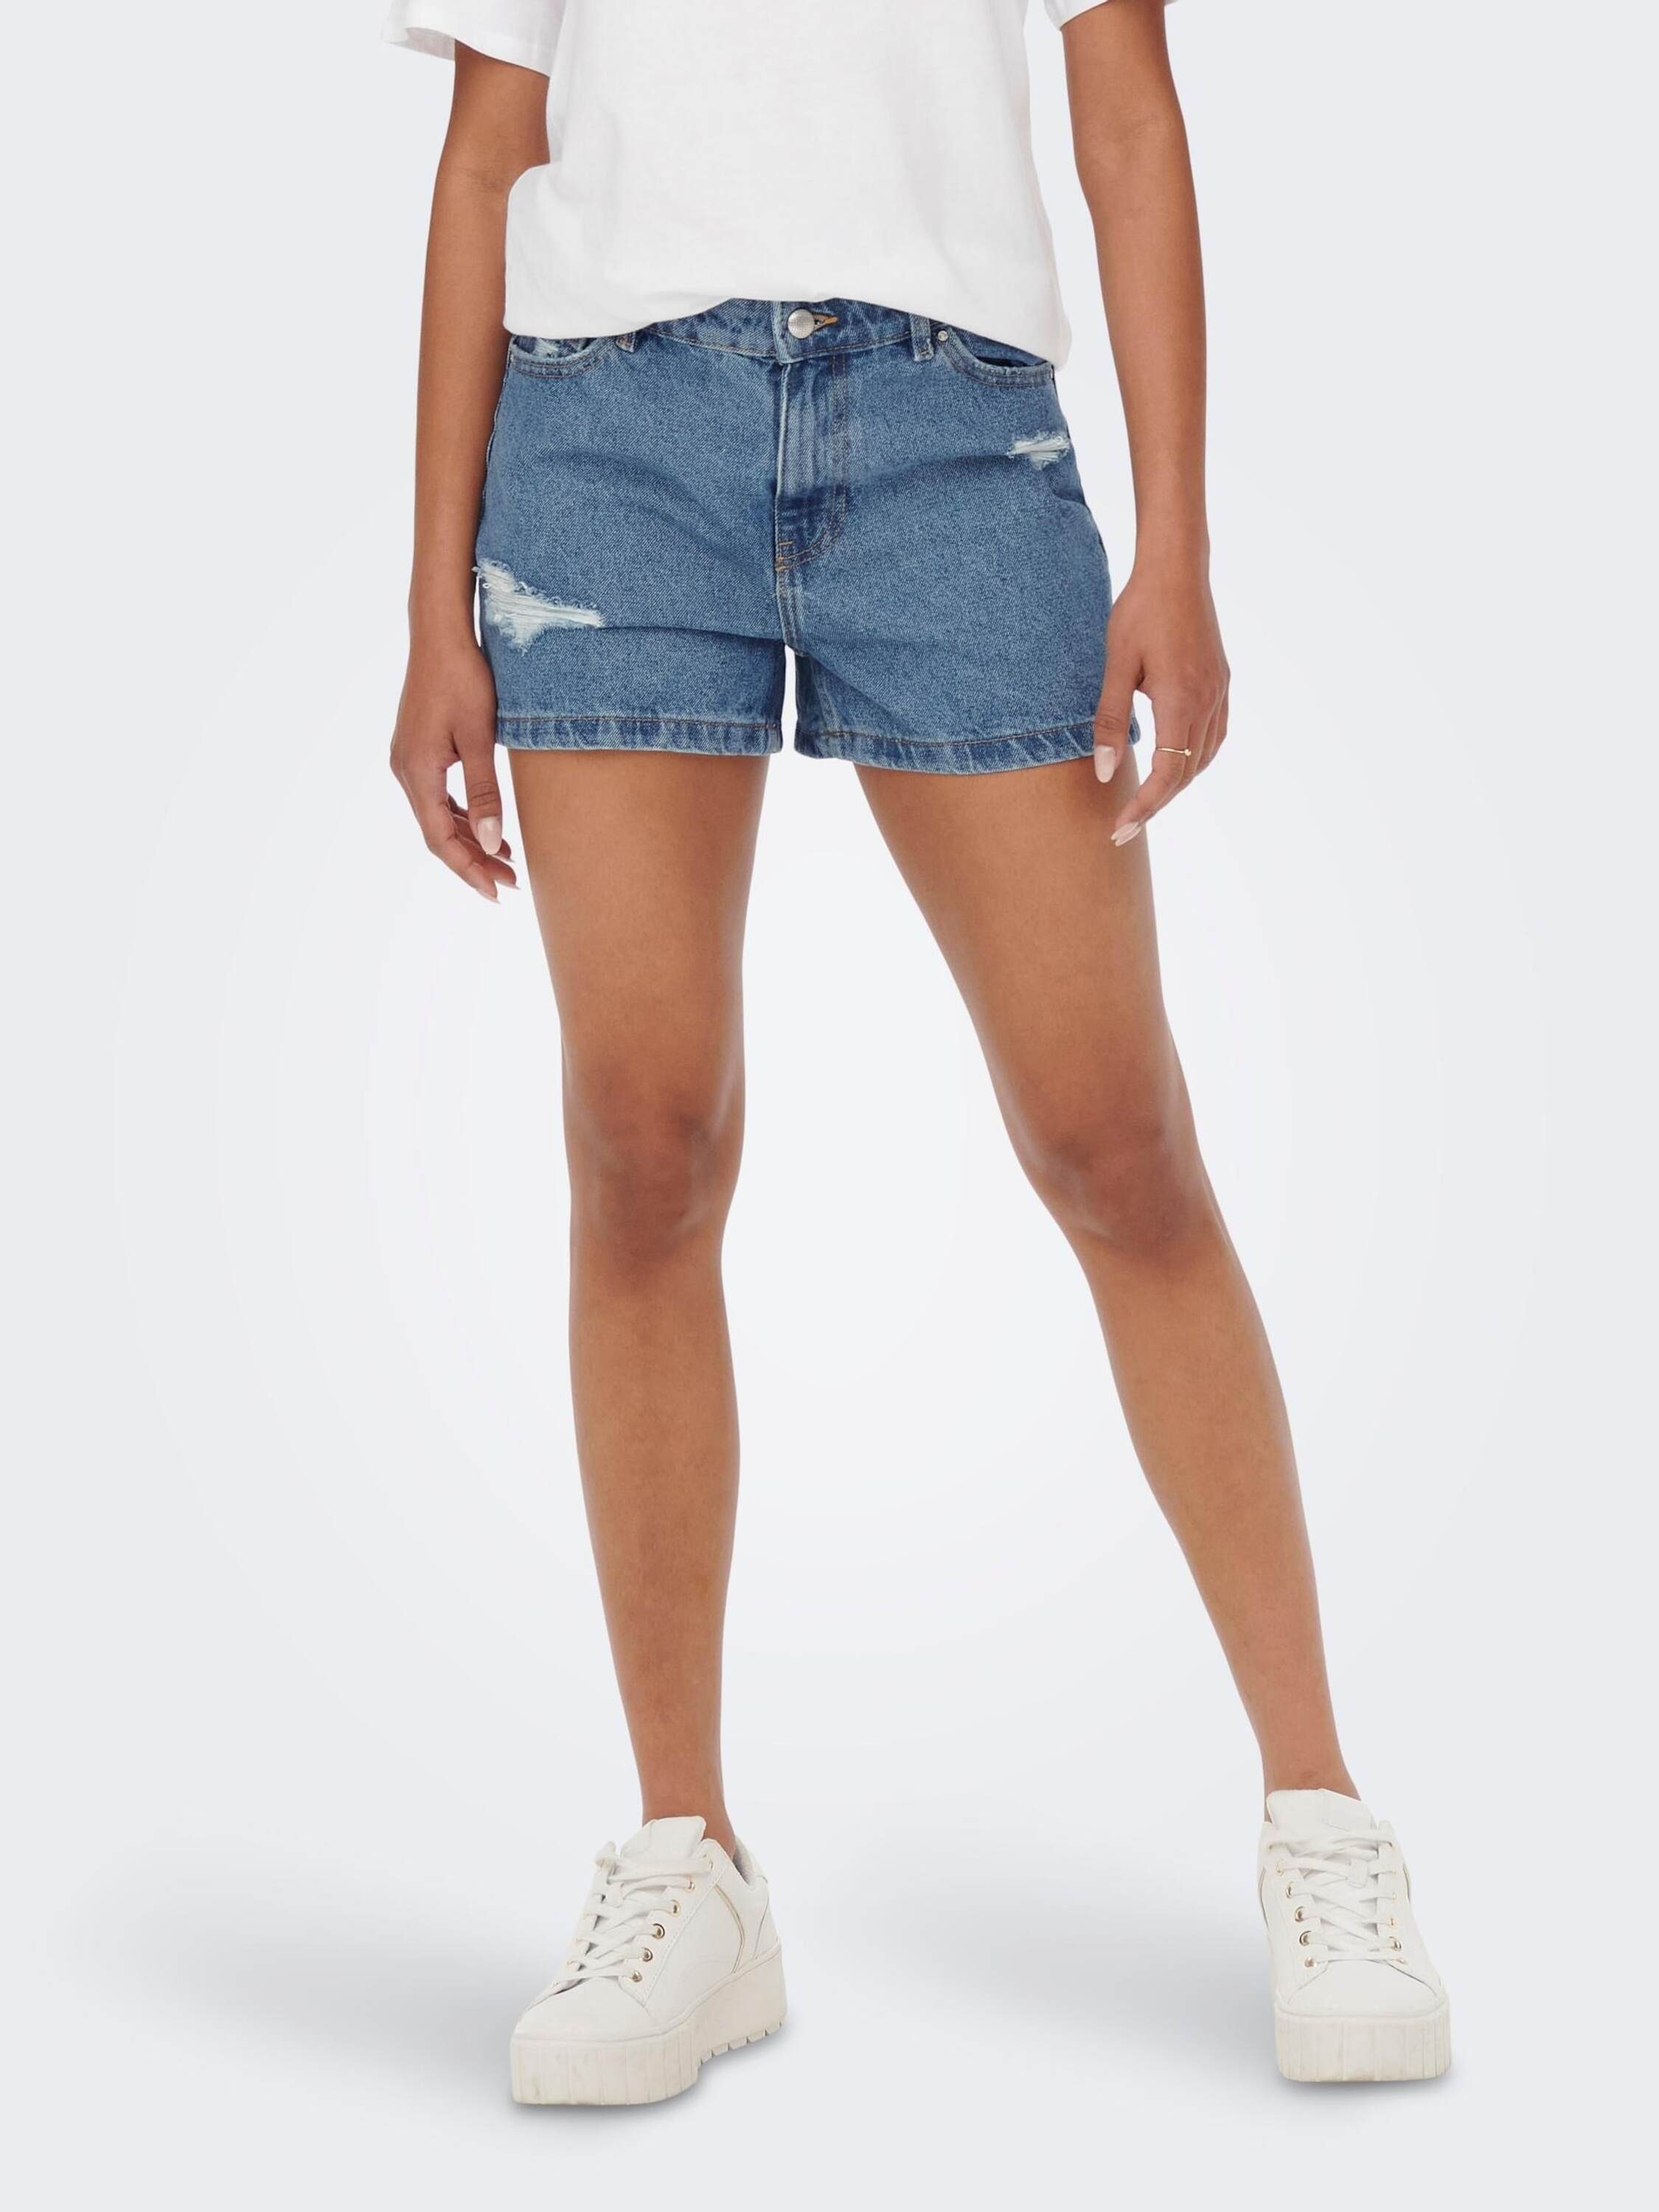 ONLY Jeansshorts Detail (1-tlg) Weiteres Jagger